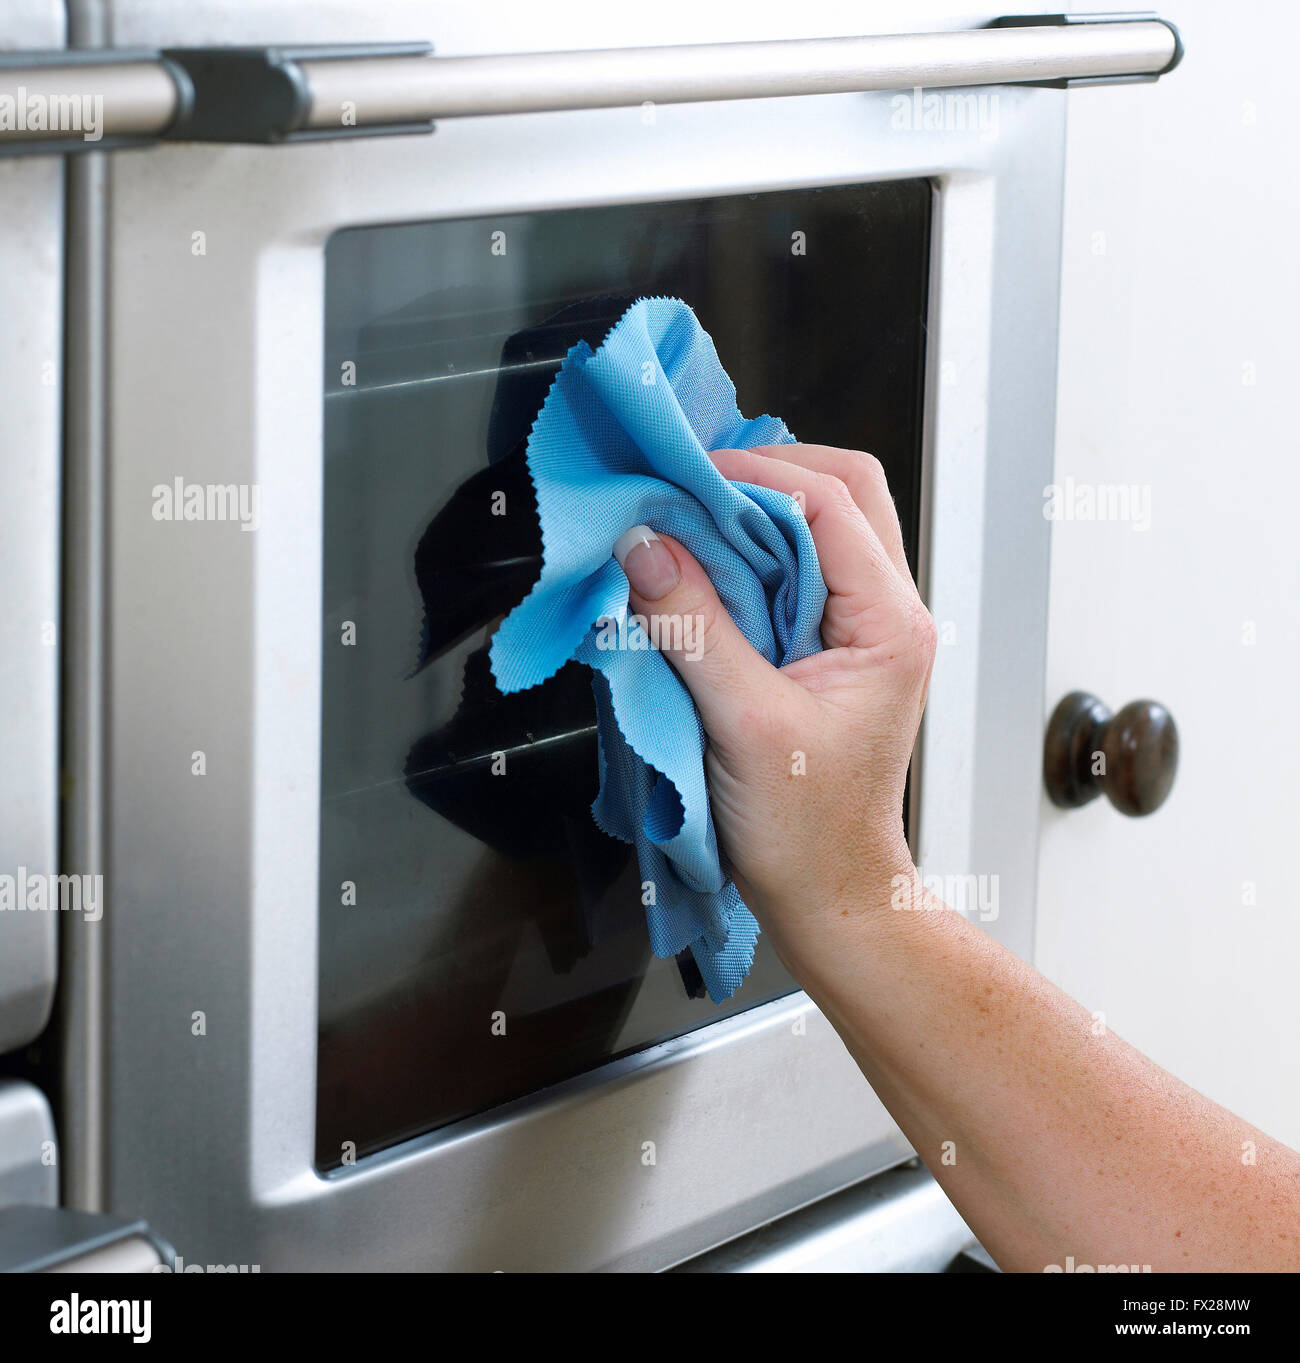 Woman cleaning a oven door with a microfiber cloth. Stock Photo